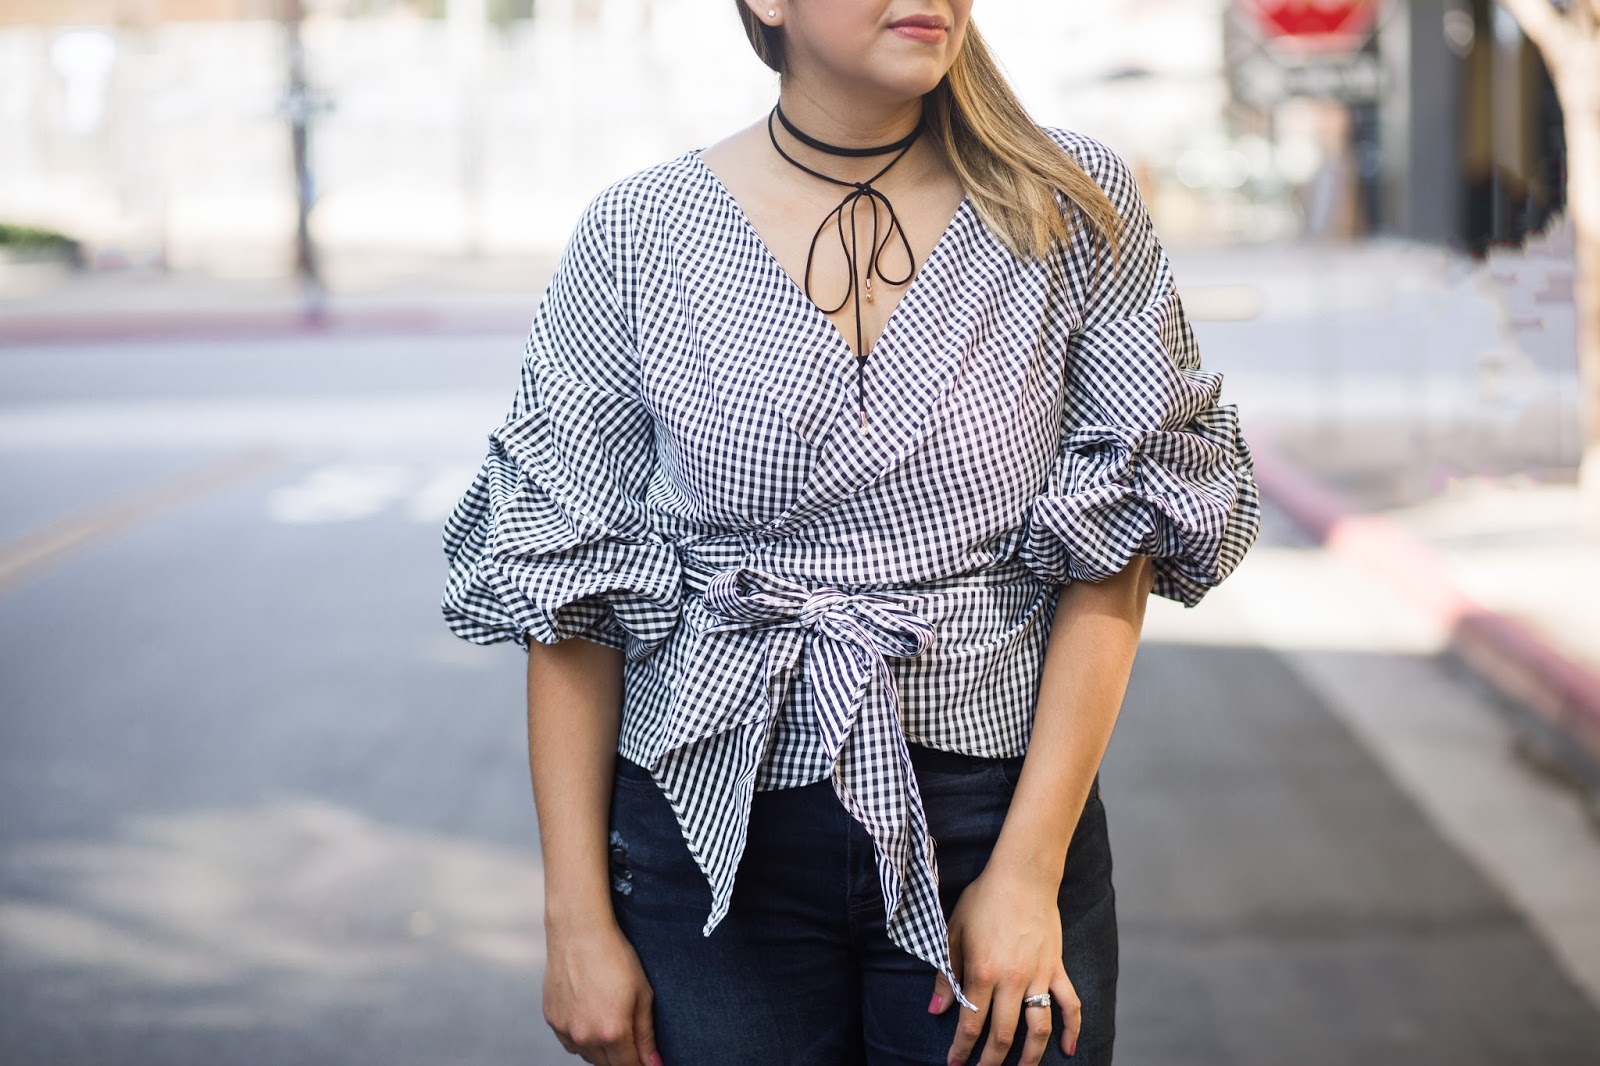 Frilly Sleeve Gingham Top, Chicwish Wrap Top, san diego style blogger